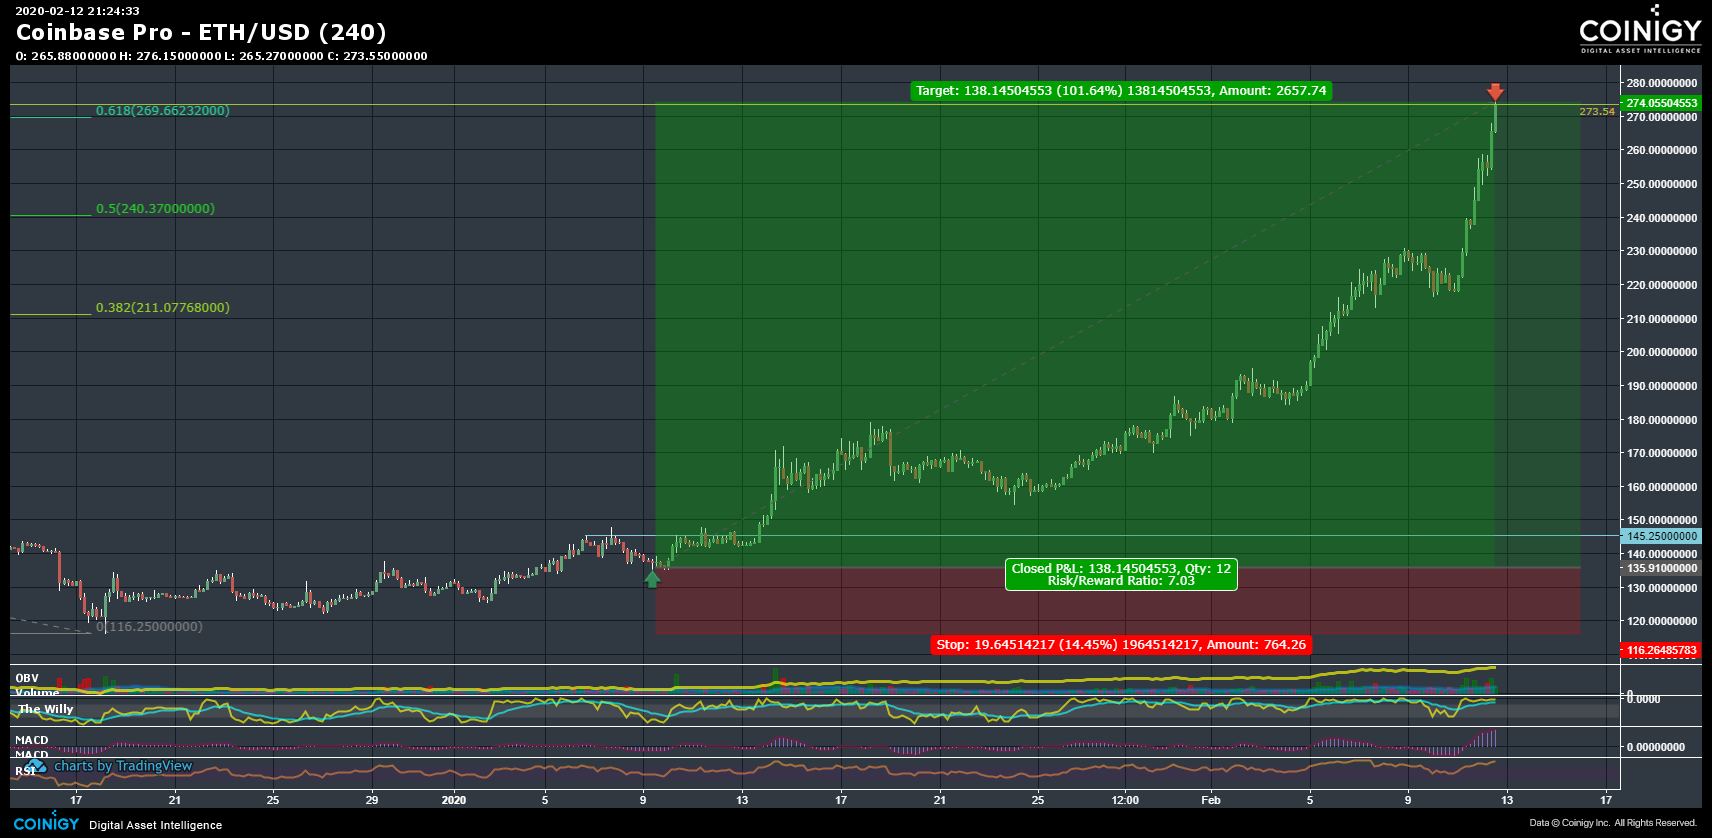 Coinbase Pro ETH/USD Chart - Published on Coinigy.com on ...